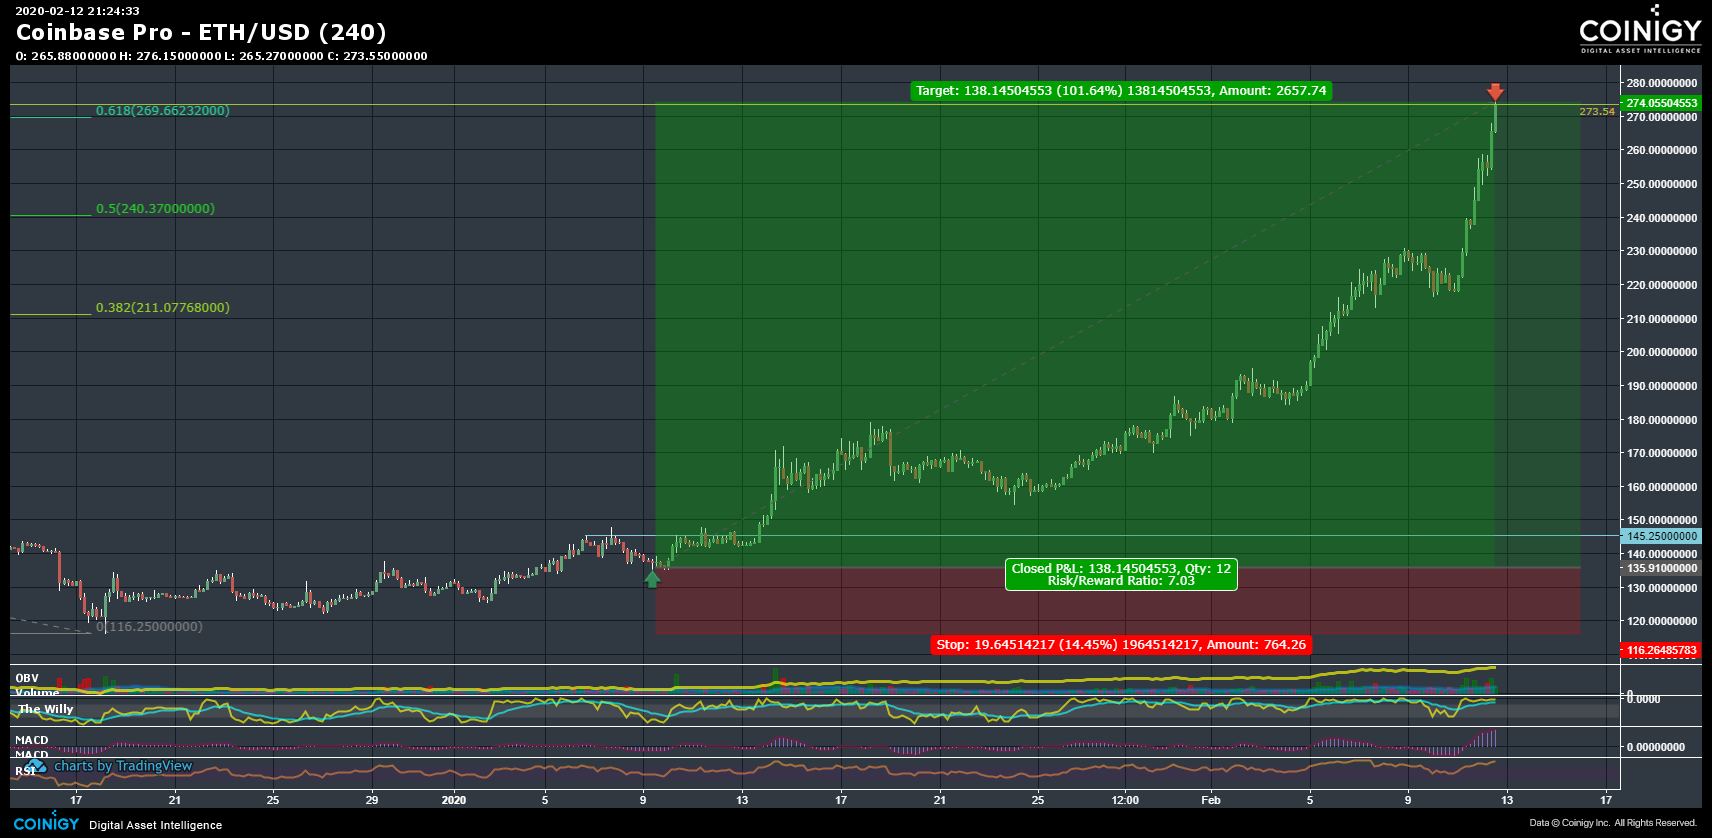 Coinbase Pro ETH/USD Chart - Published on Coinigy.com on ...